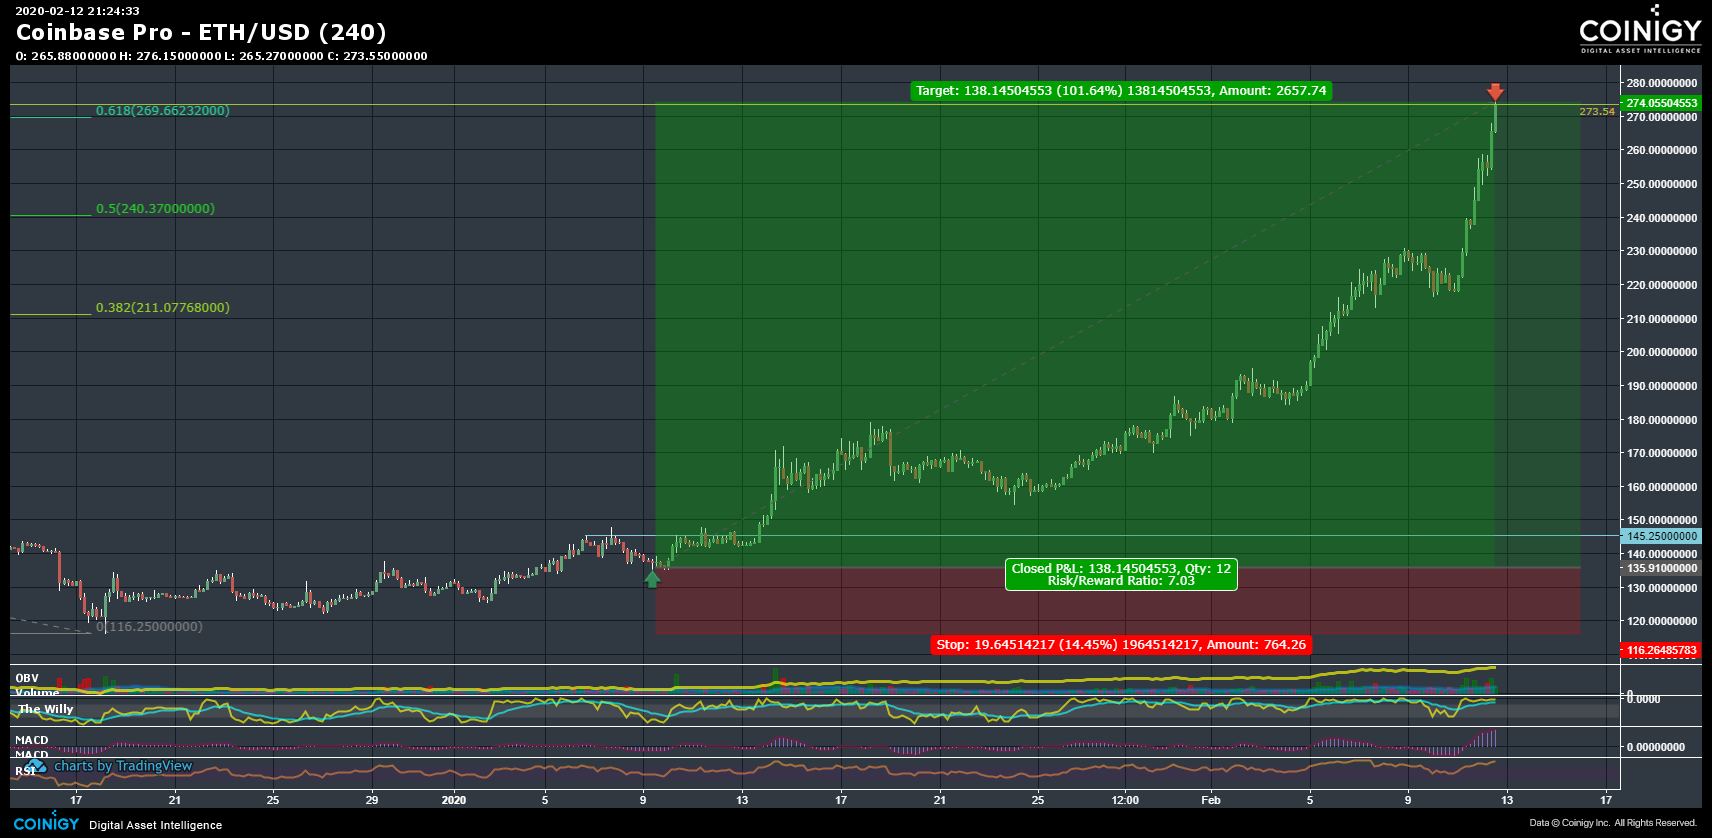 Coinbase Pro ETH/USD Chart - Published on Coinigy.com on ...